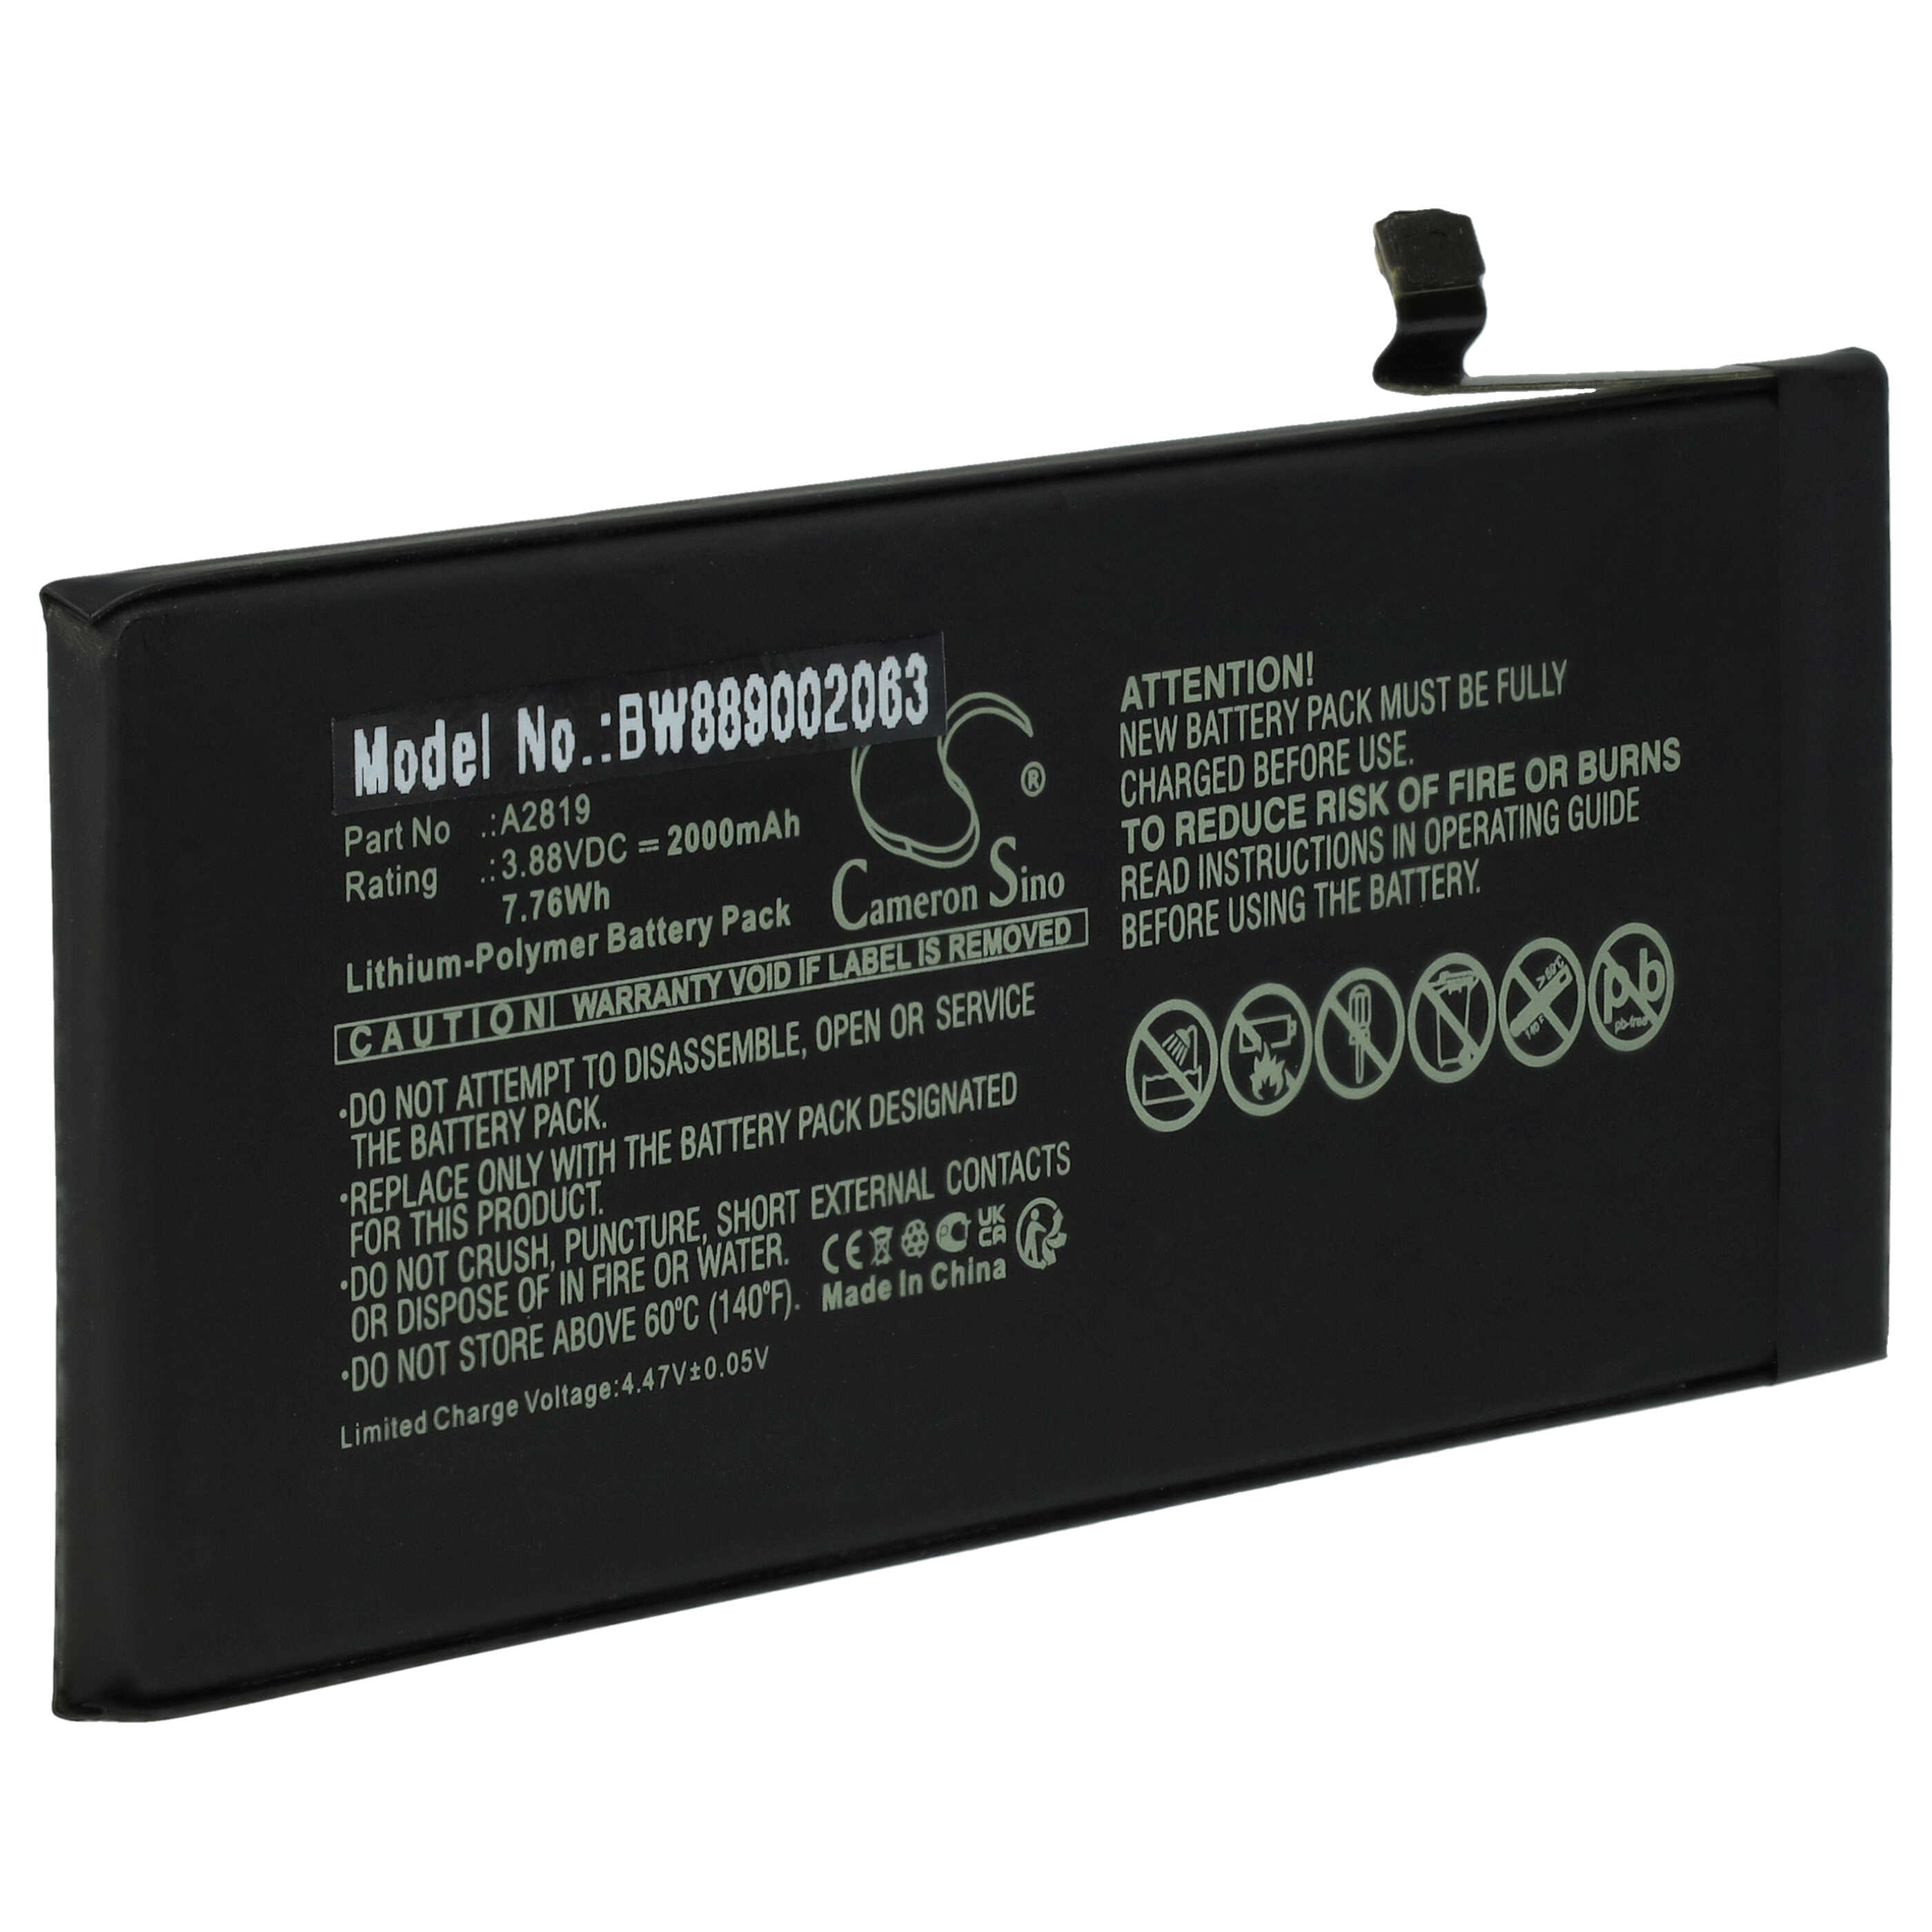 Mobile Phone Battery Replacement for Apple A2819 - 2000mAh 3.88V Li-polymer